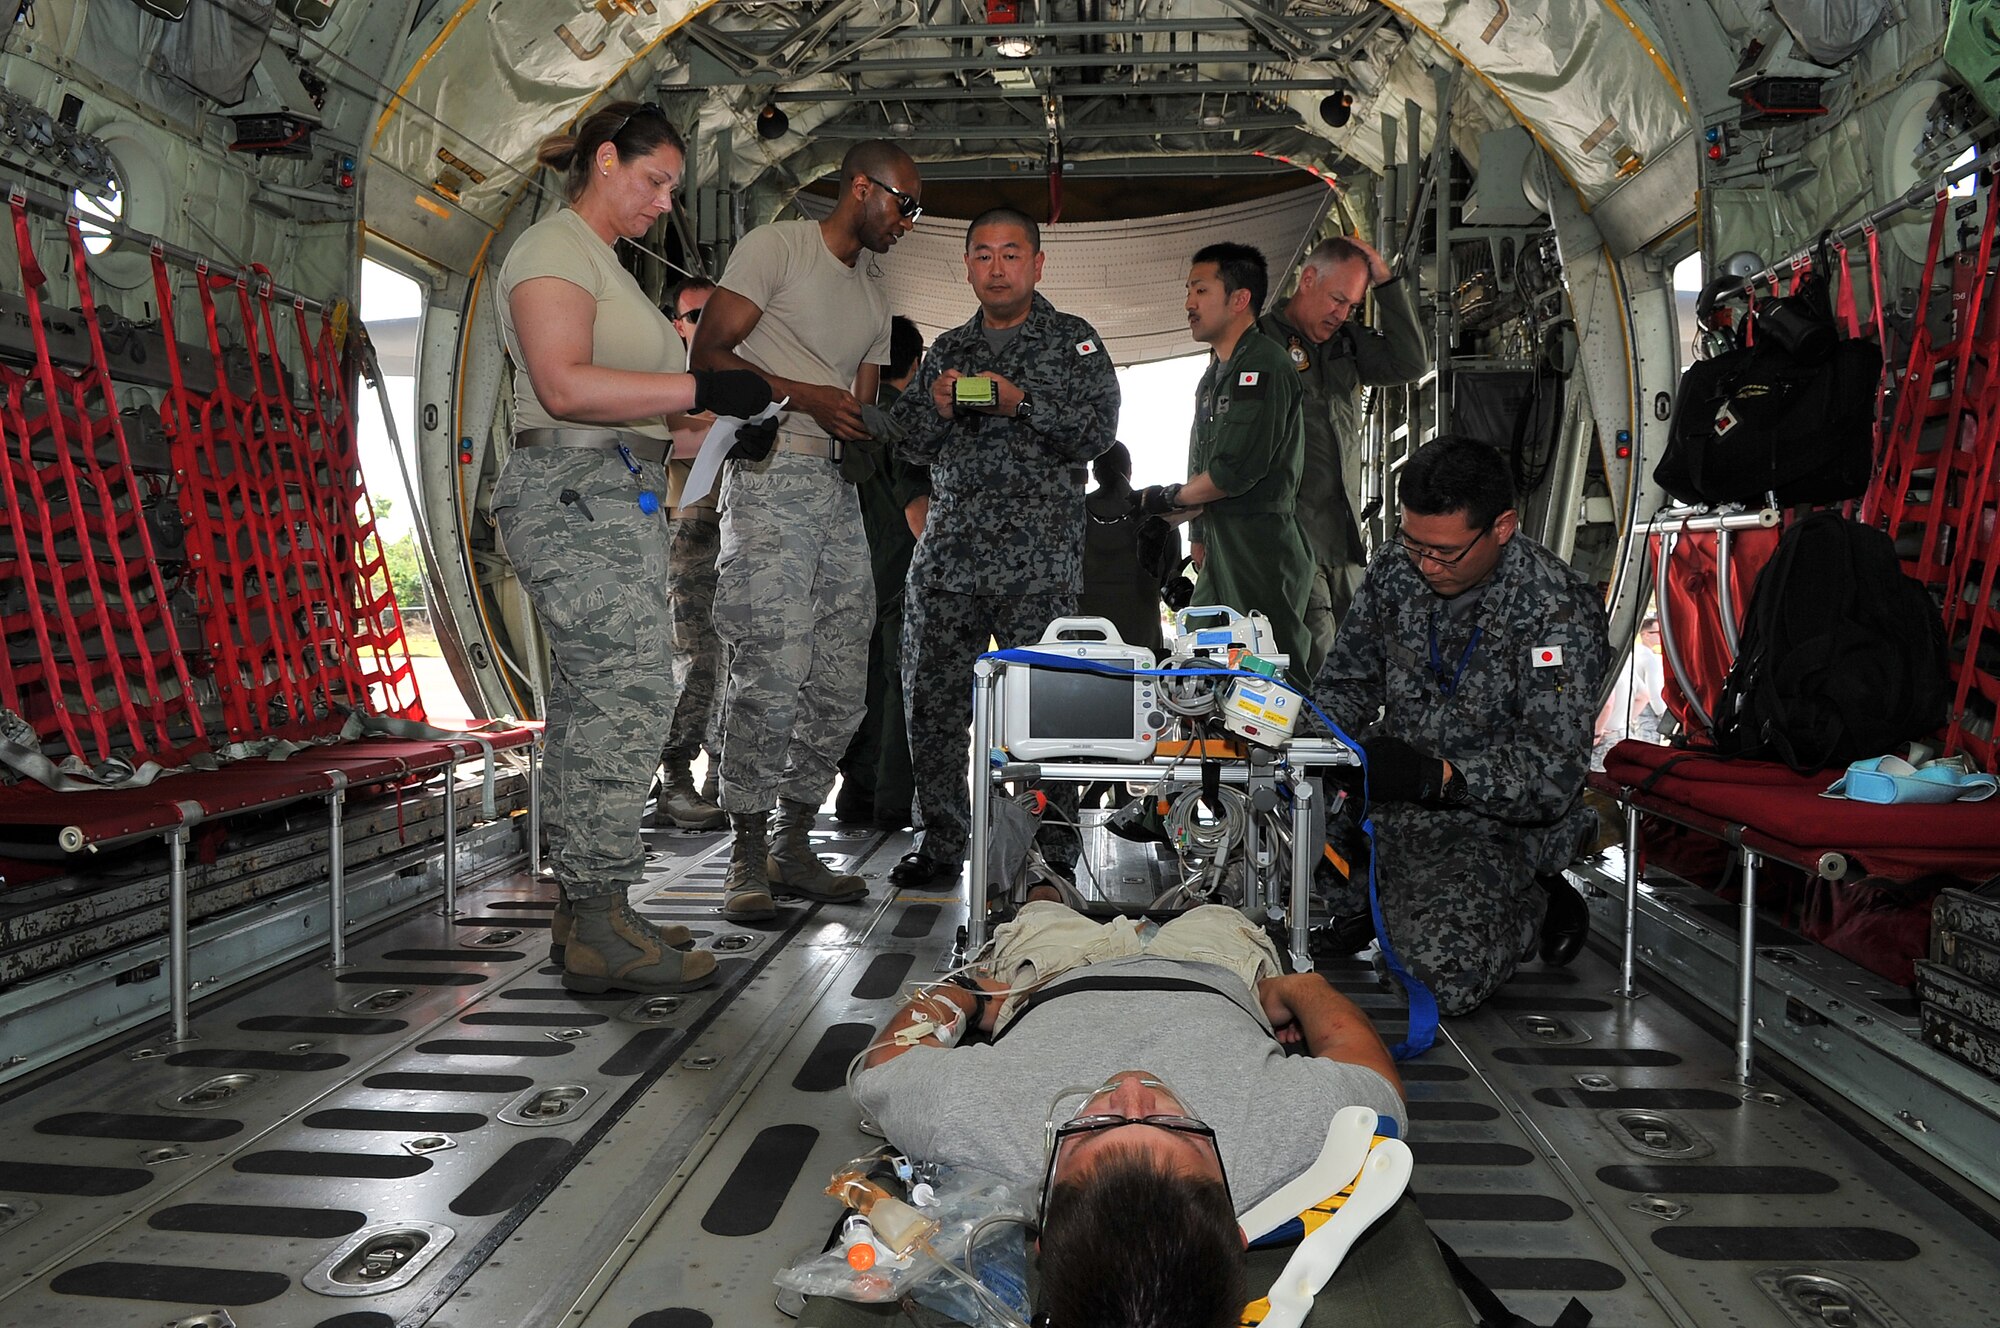 U.S. Air Force Airmen transfer a critical care patient to a Japan Air Self-Defense Force aeromedical evacuation team at Sinapalo, Rota, Feb. 16, 2015. Exercise COPE NORTH 15 enhances humanitarian assistance and disaster relief crisis response capabilities between six nations and lays the foundation for regional cooperation expansion during real-world contingencies in the Asia-Pacific Region. (U.S. Air Force photo by Staff Sgt. Melissa B. White/Released)